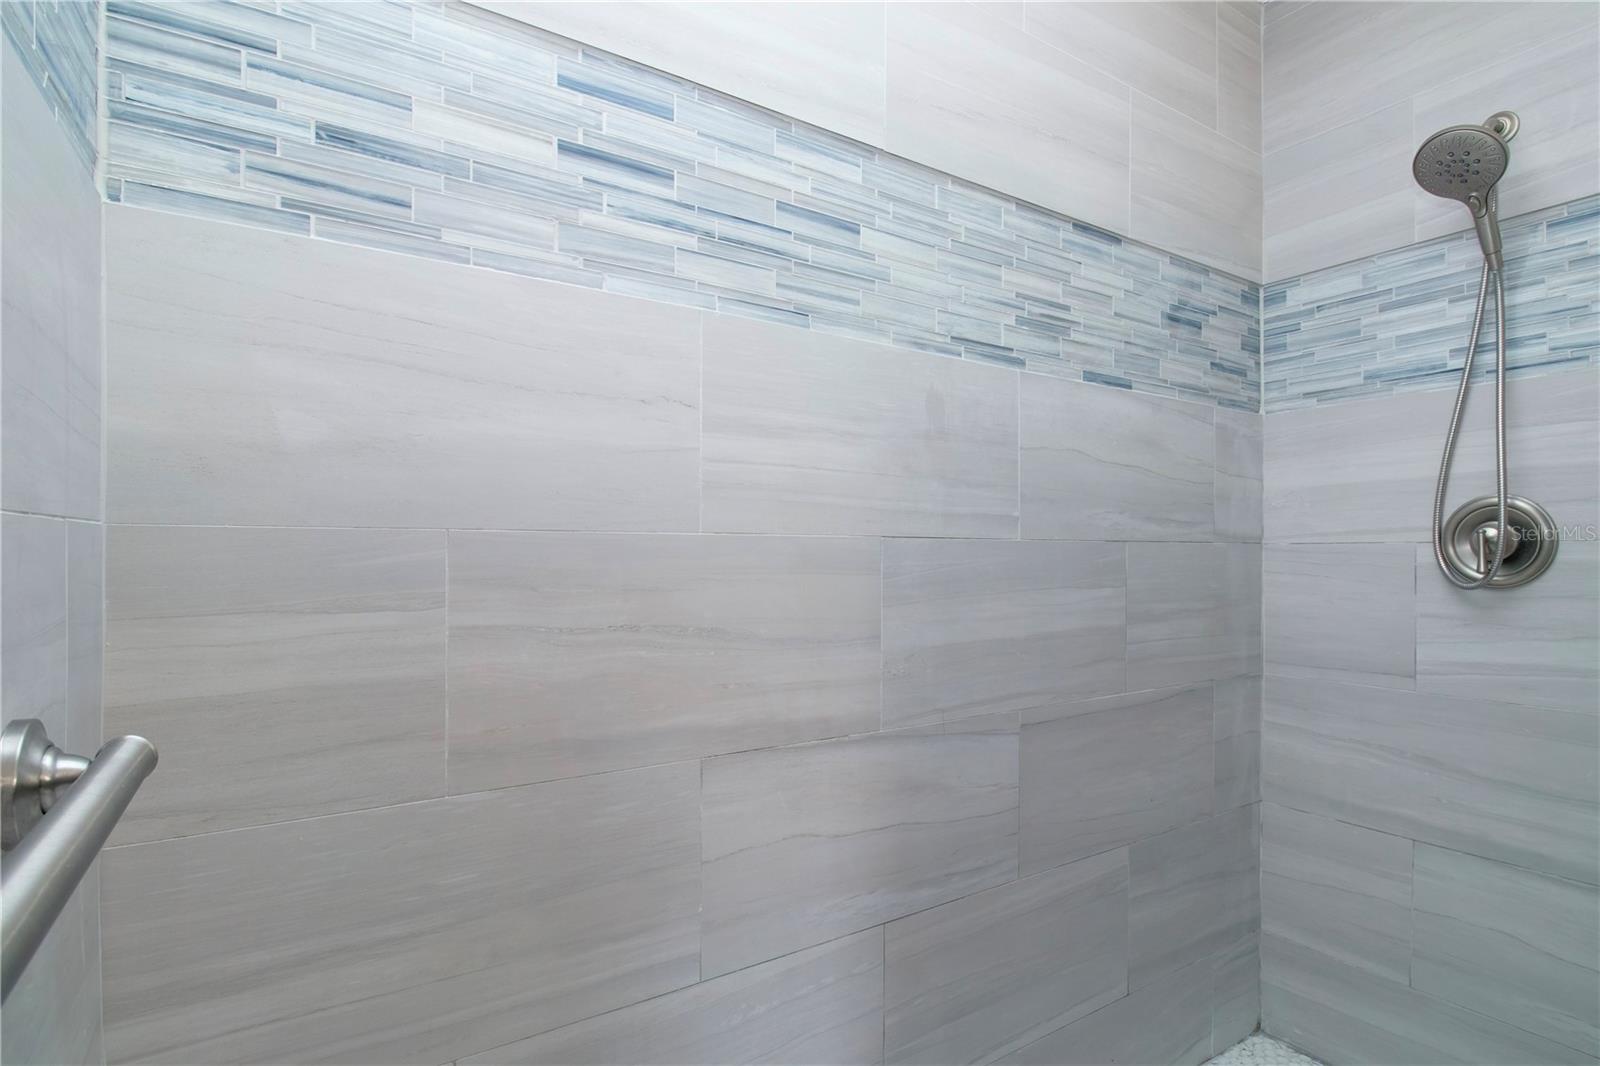 New expanded shower